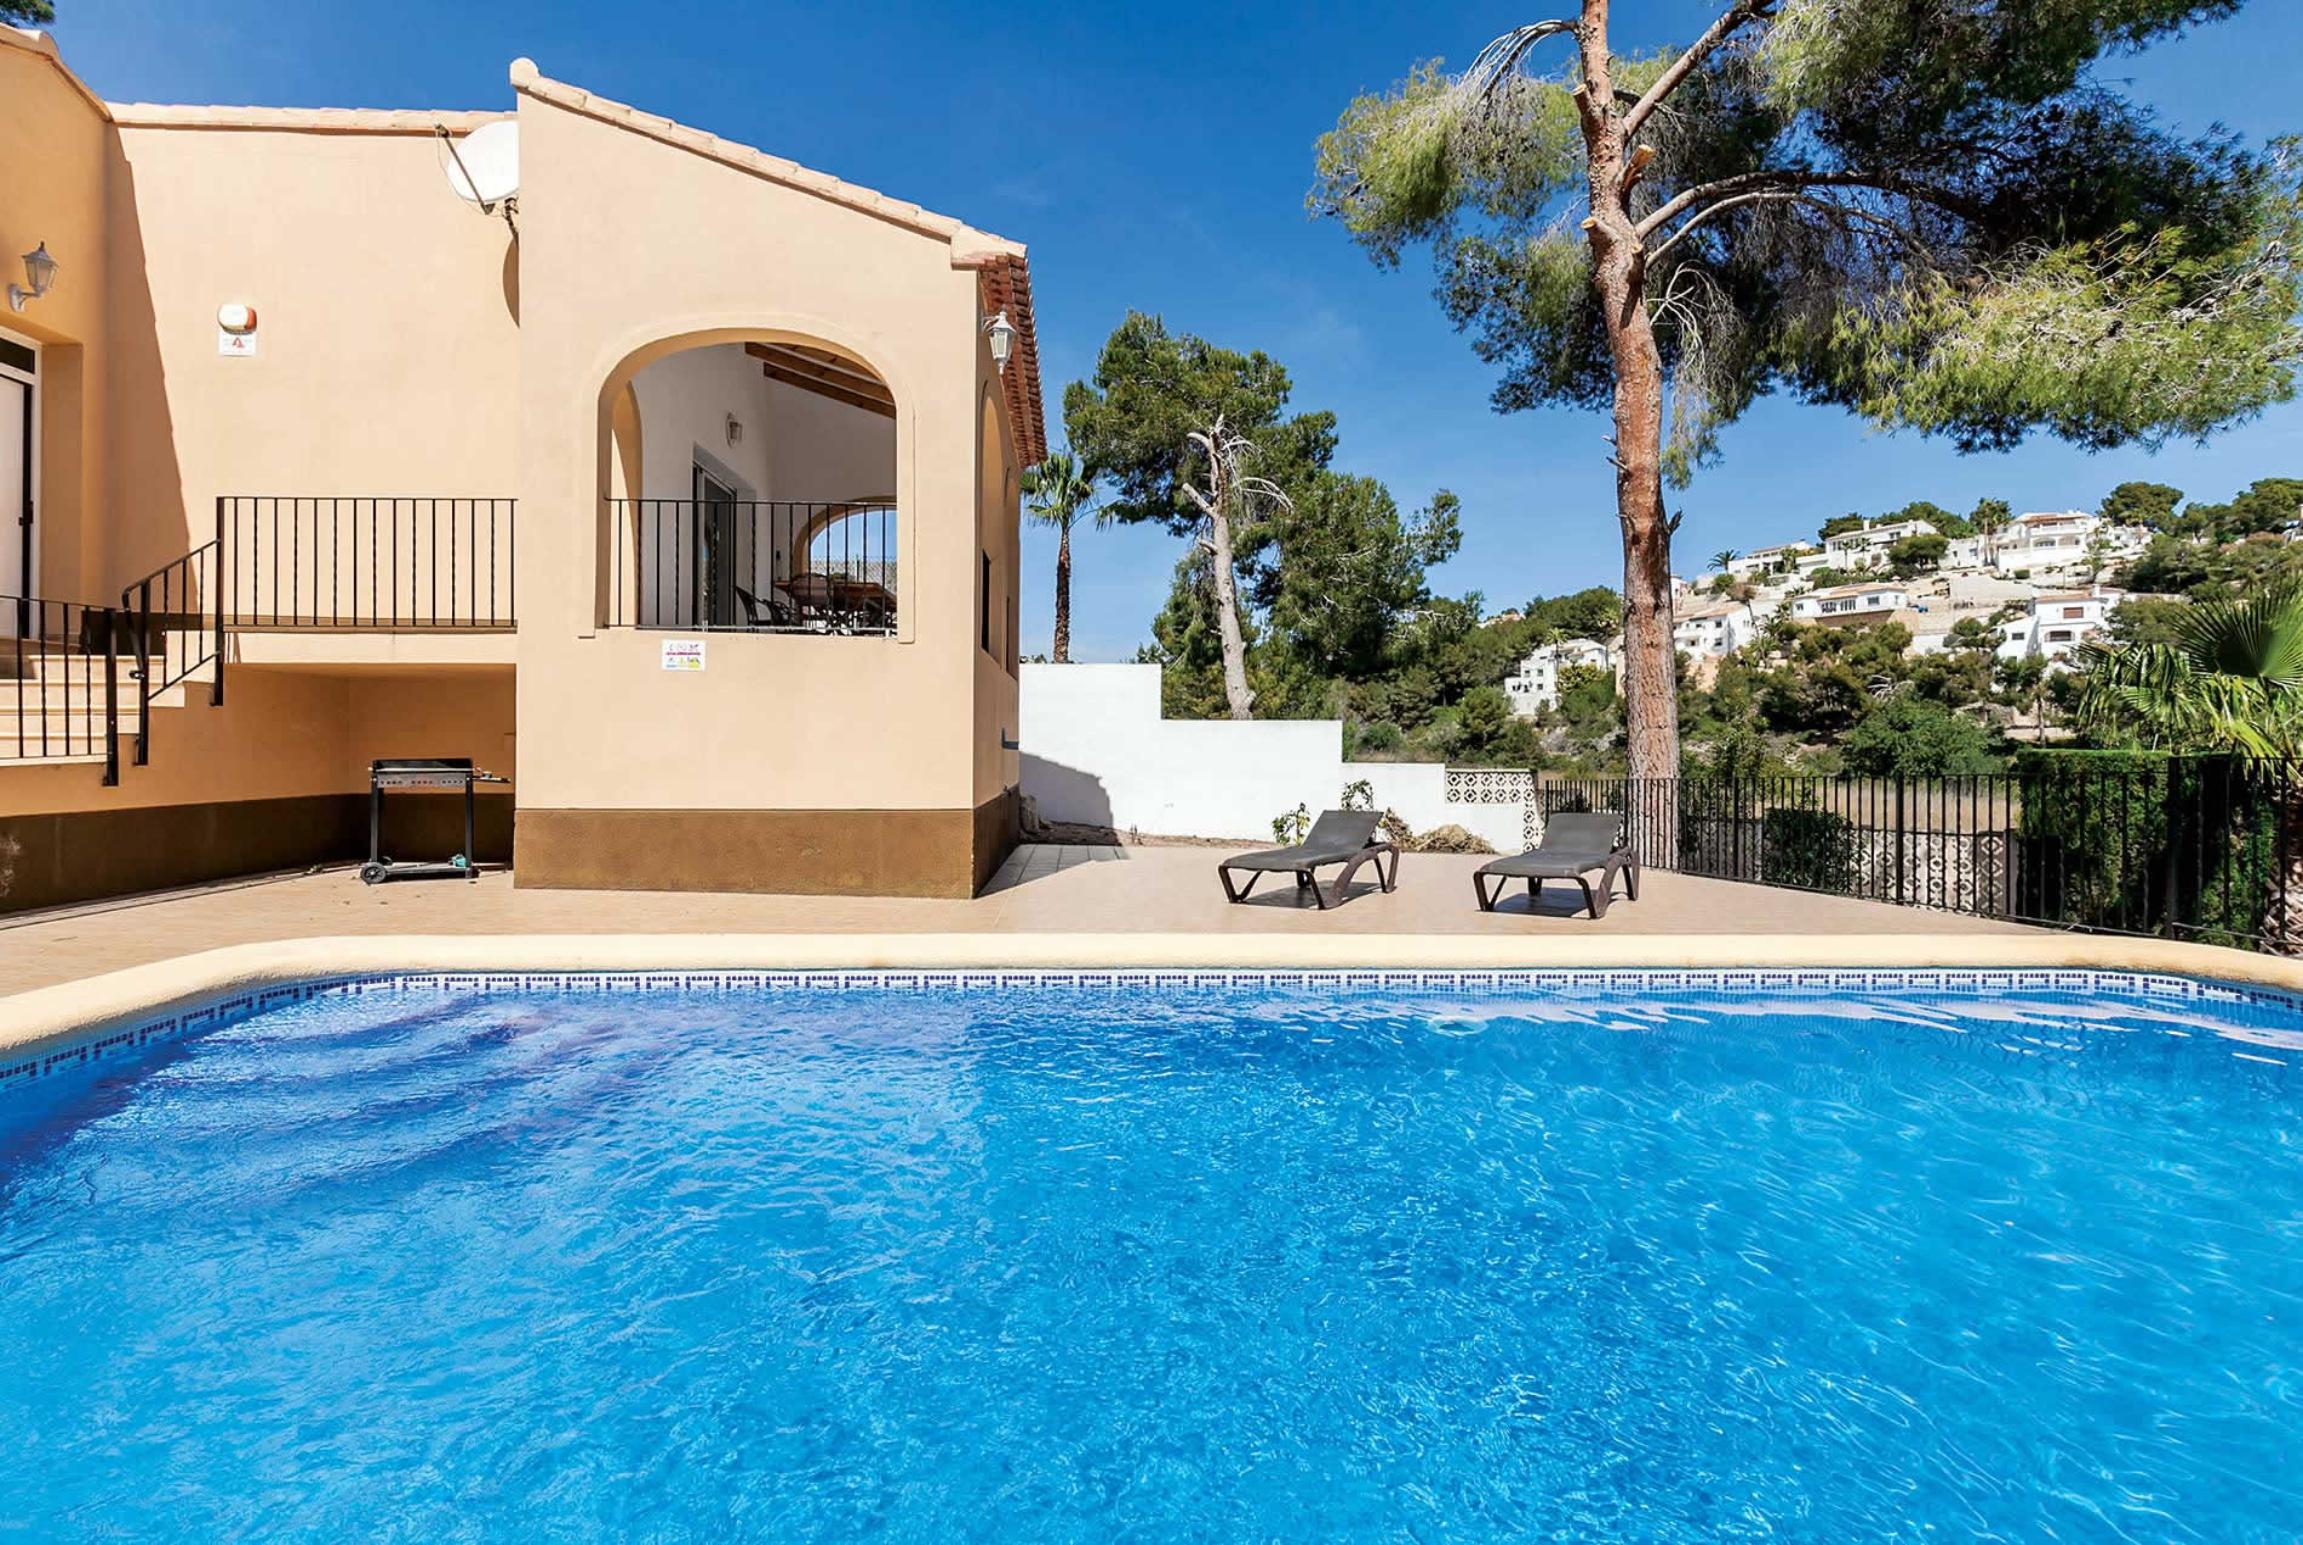 Property Image 2 - 3 bed villa, walking distance to amenities & beach